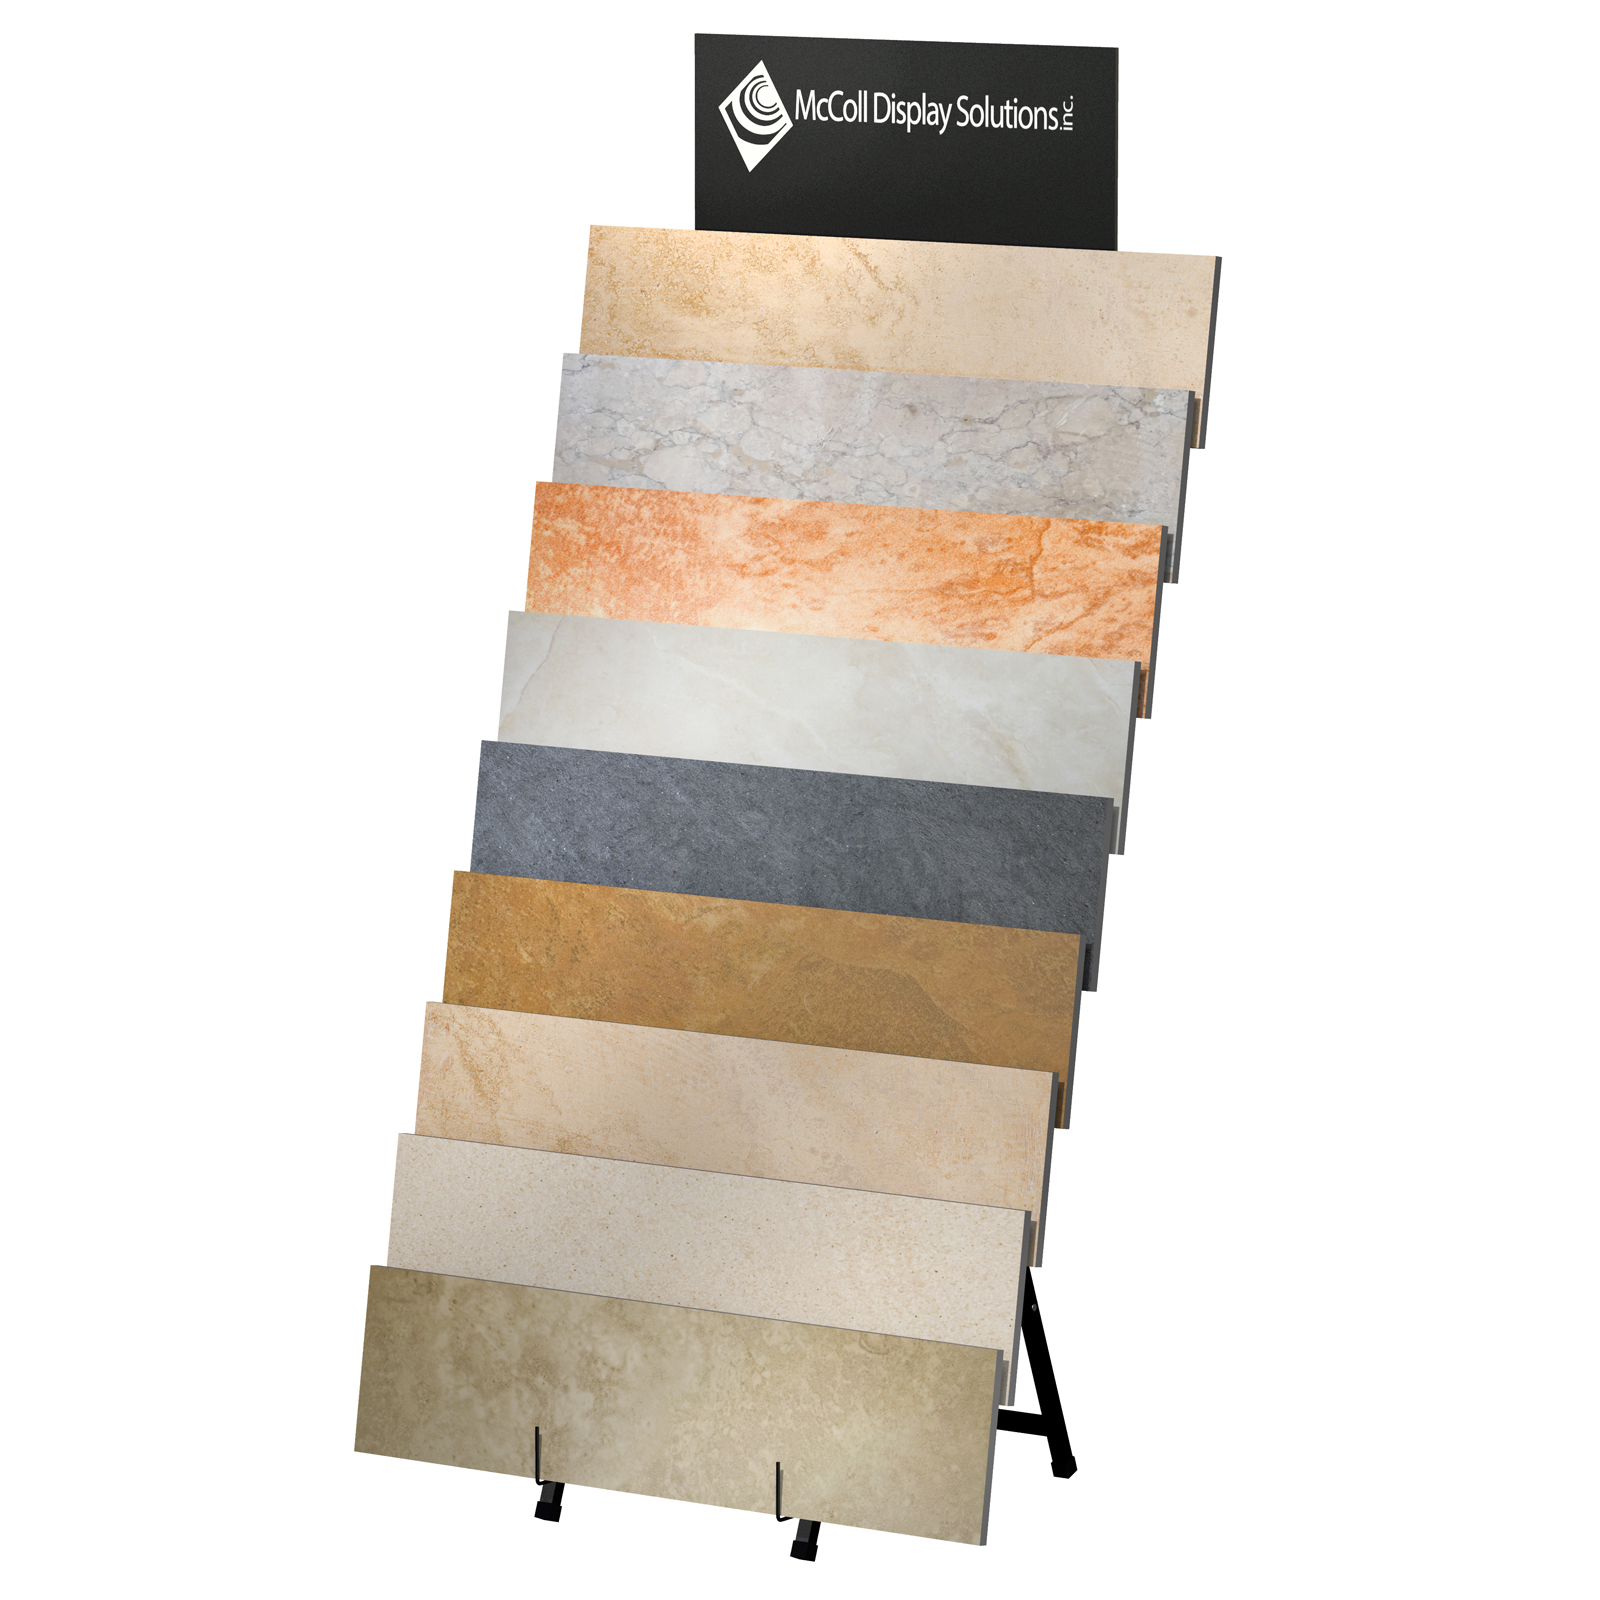 A99 Plank Ceramic Samples Tile Easel A-Frame Stone Marble Showroom Displays McColl Display